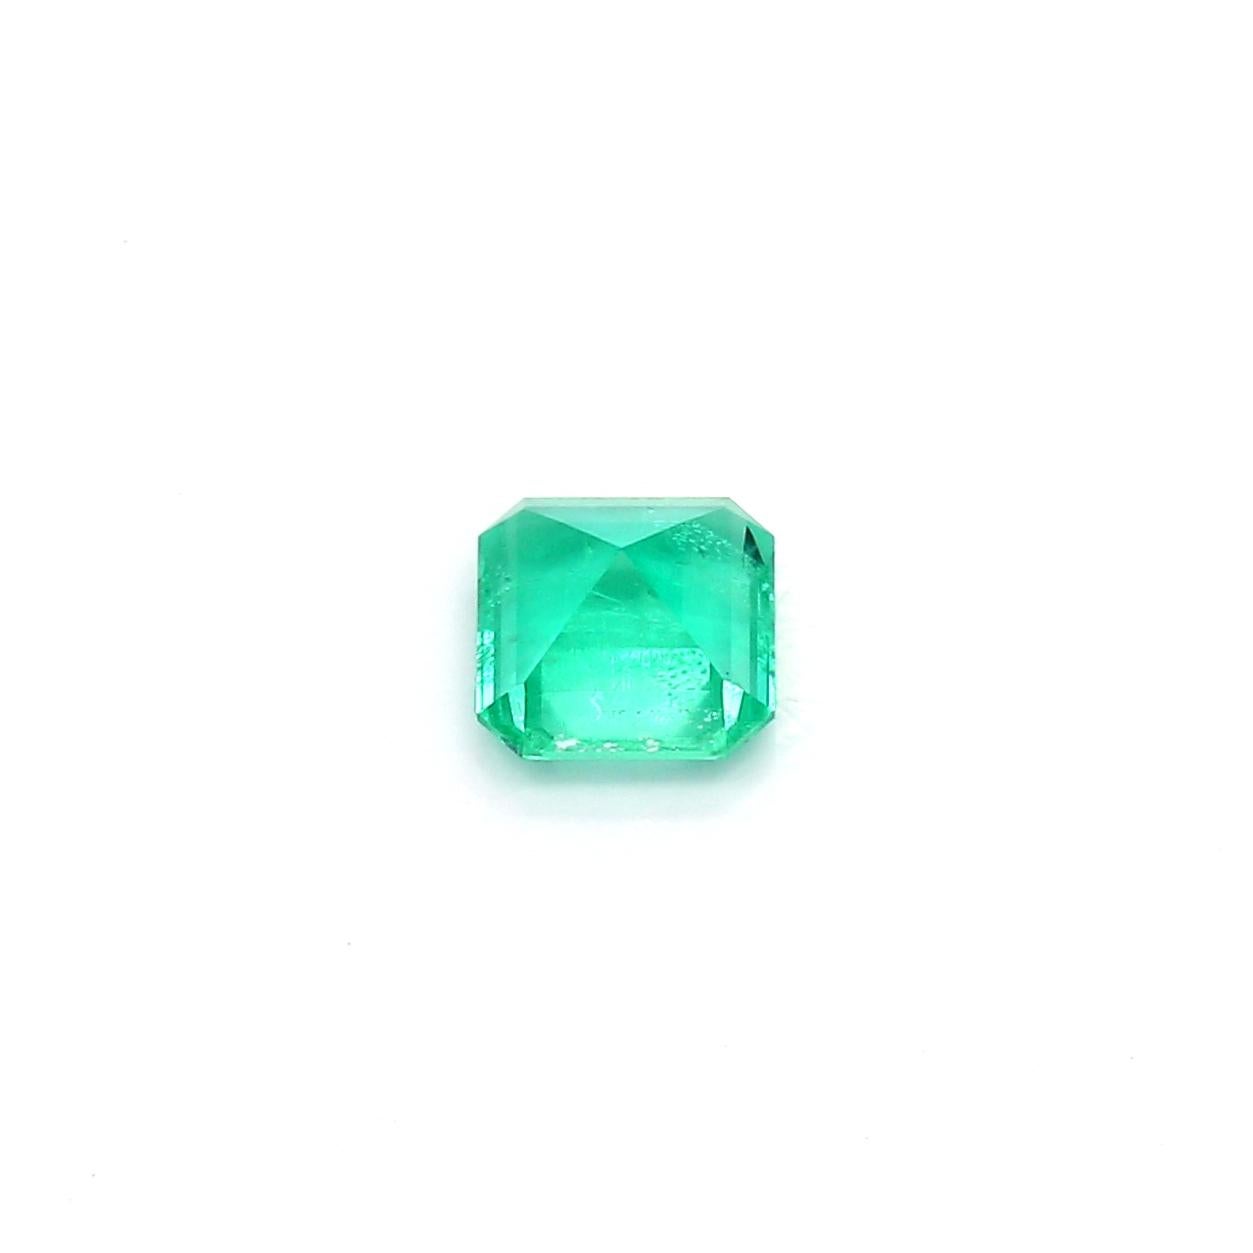 An amazing octagon-shaped Russian Emerald which allows jewelers to create a unique piece of wearable art.
This exceptional quality gemstone would make a custom-made jewelry design. Perfect for a Ring or Pendant.

Shape - Octagon
Weight - 0.62